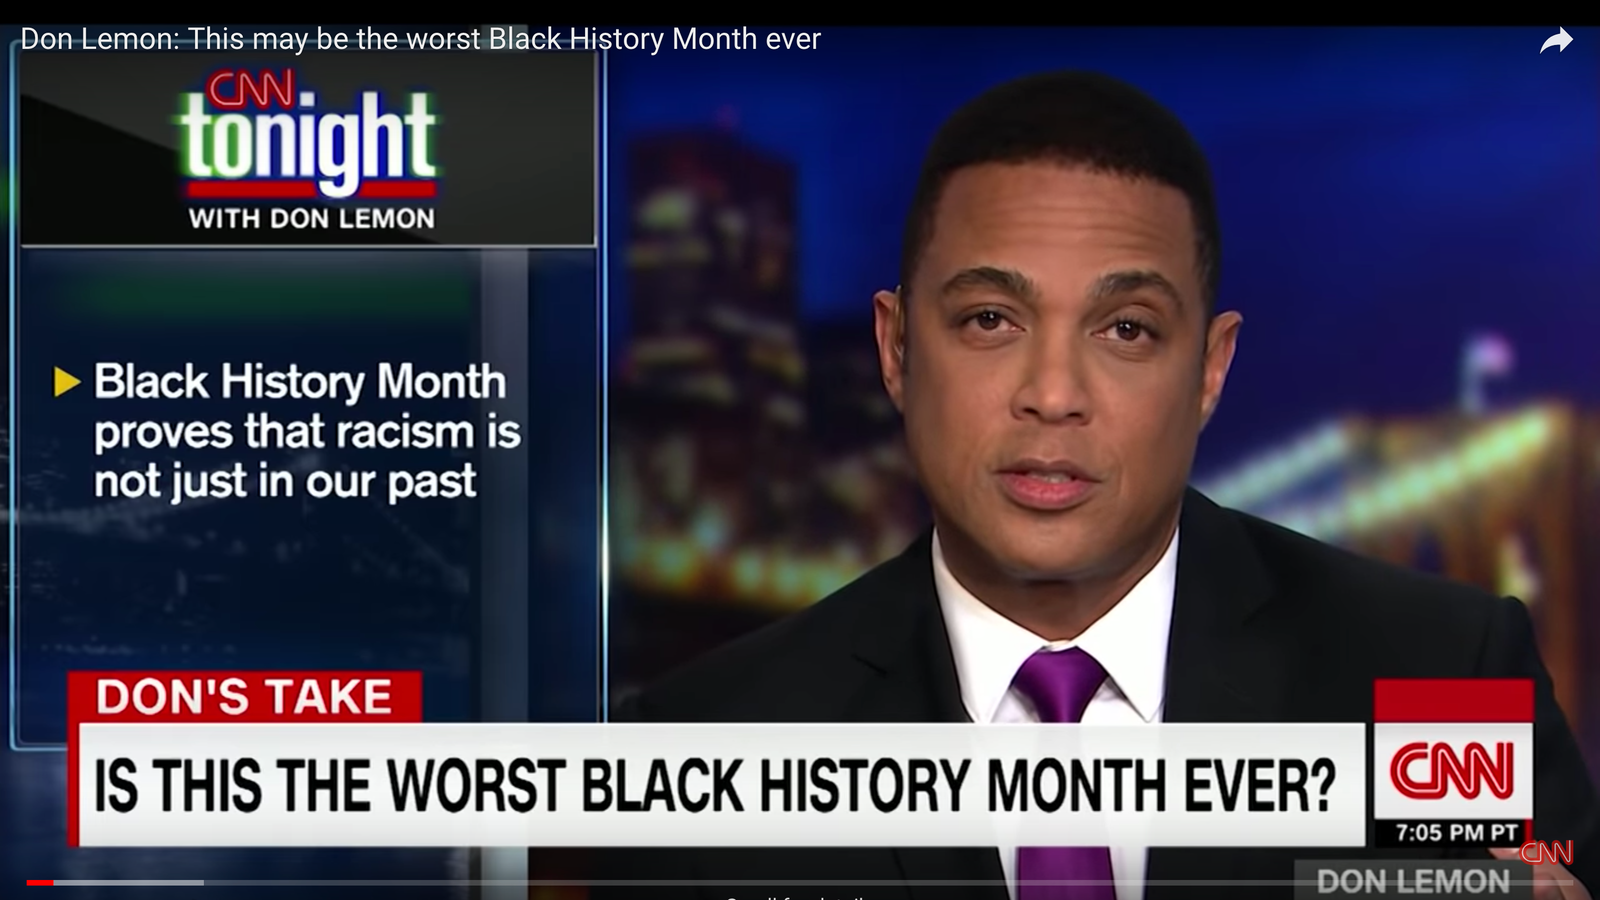 Don Lemon Says This Was the Worst Black History Month Ever